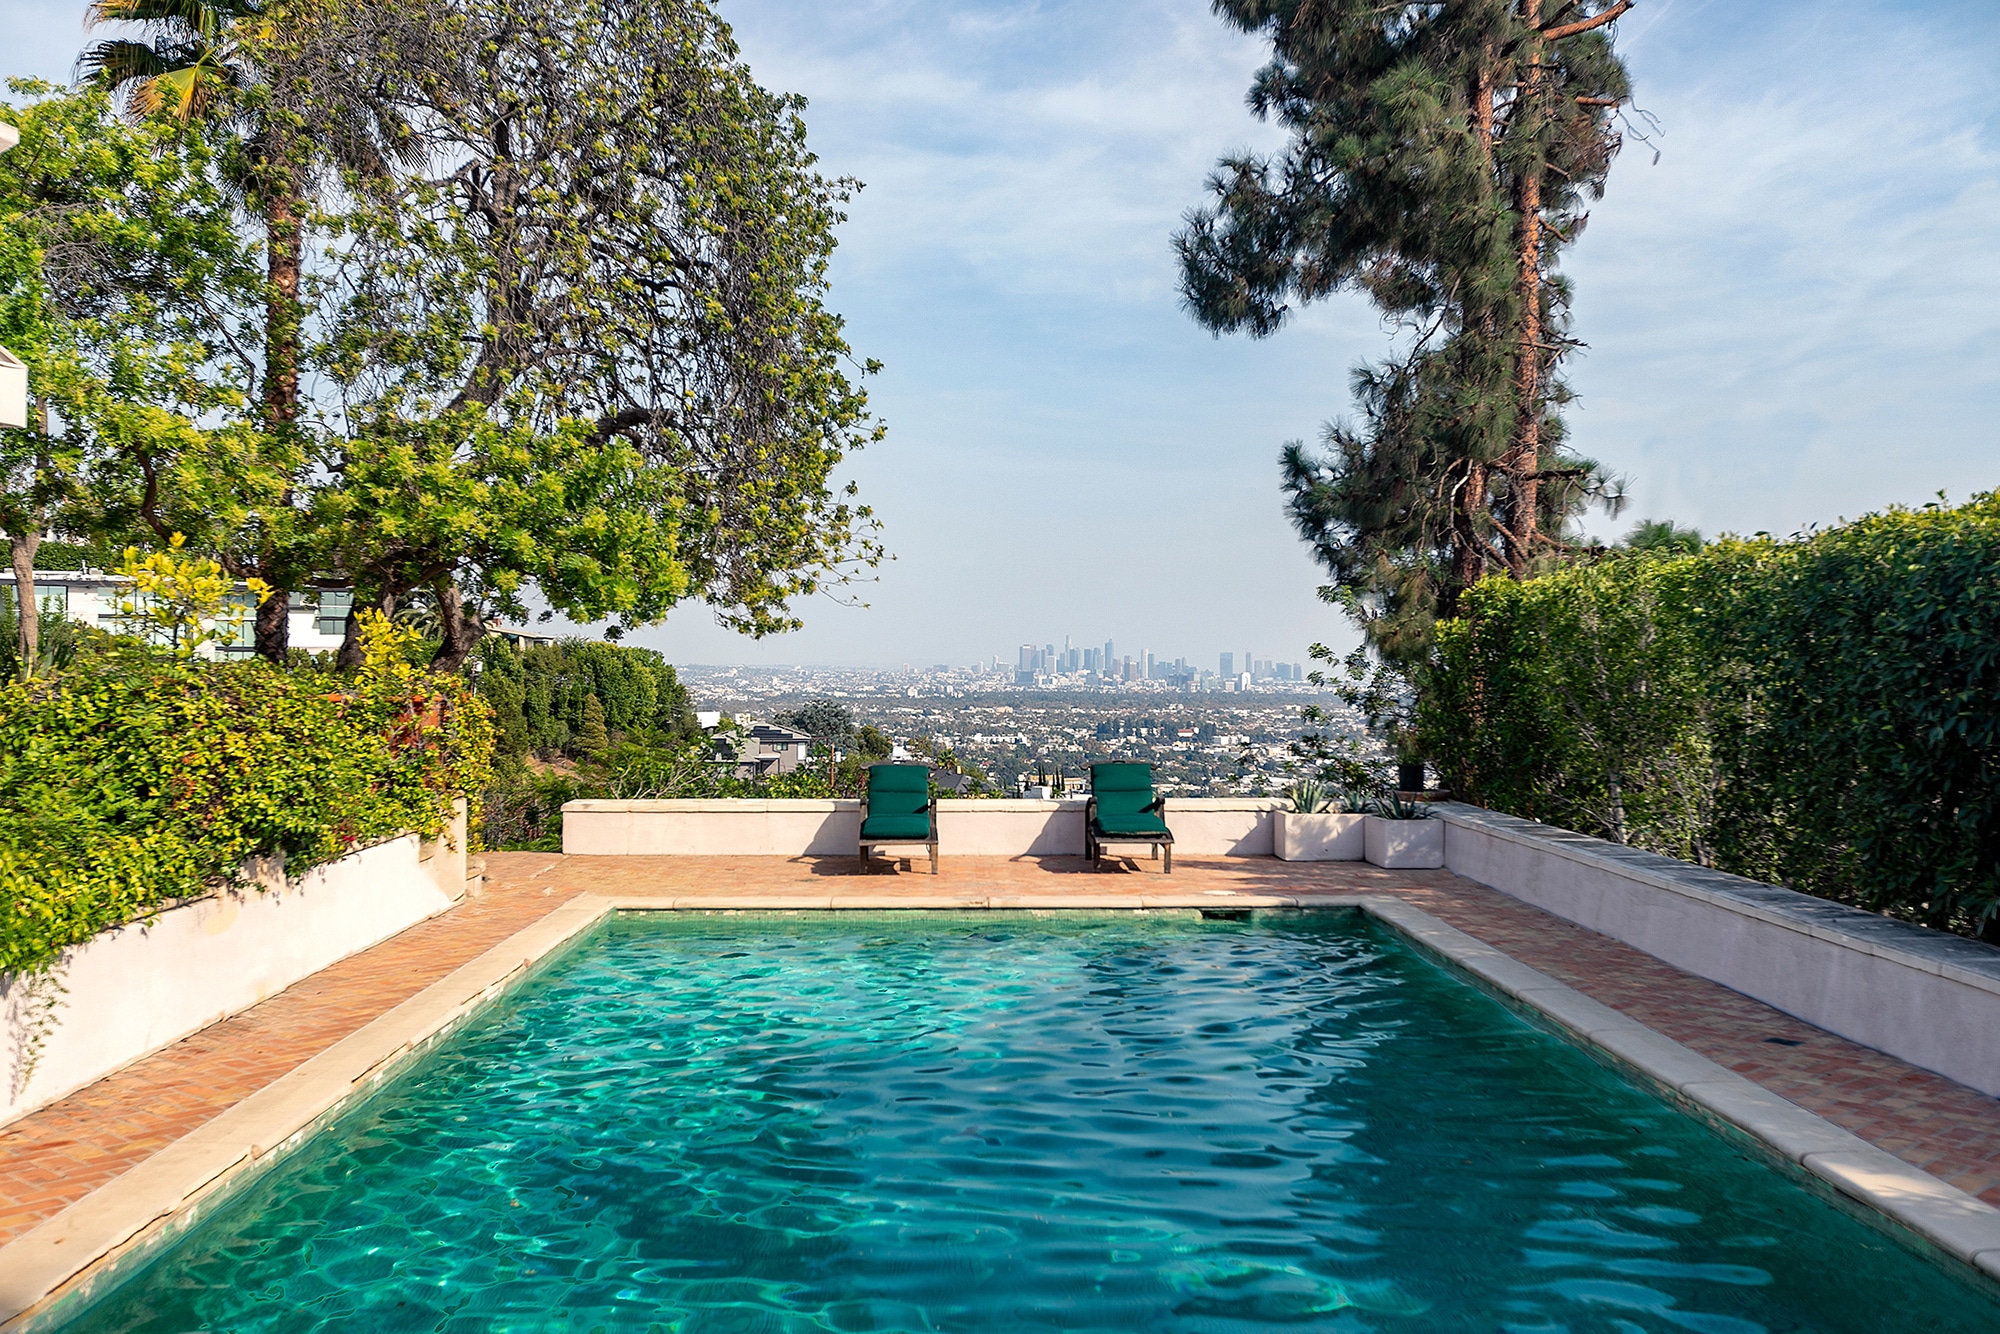 Michael And Pat York Seek $7 Million For Hollywood Hills Home With Bonus Lot